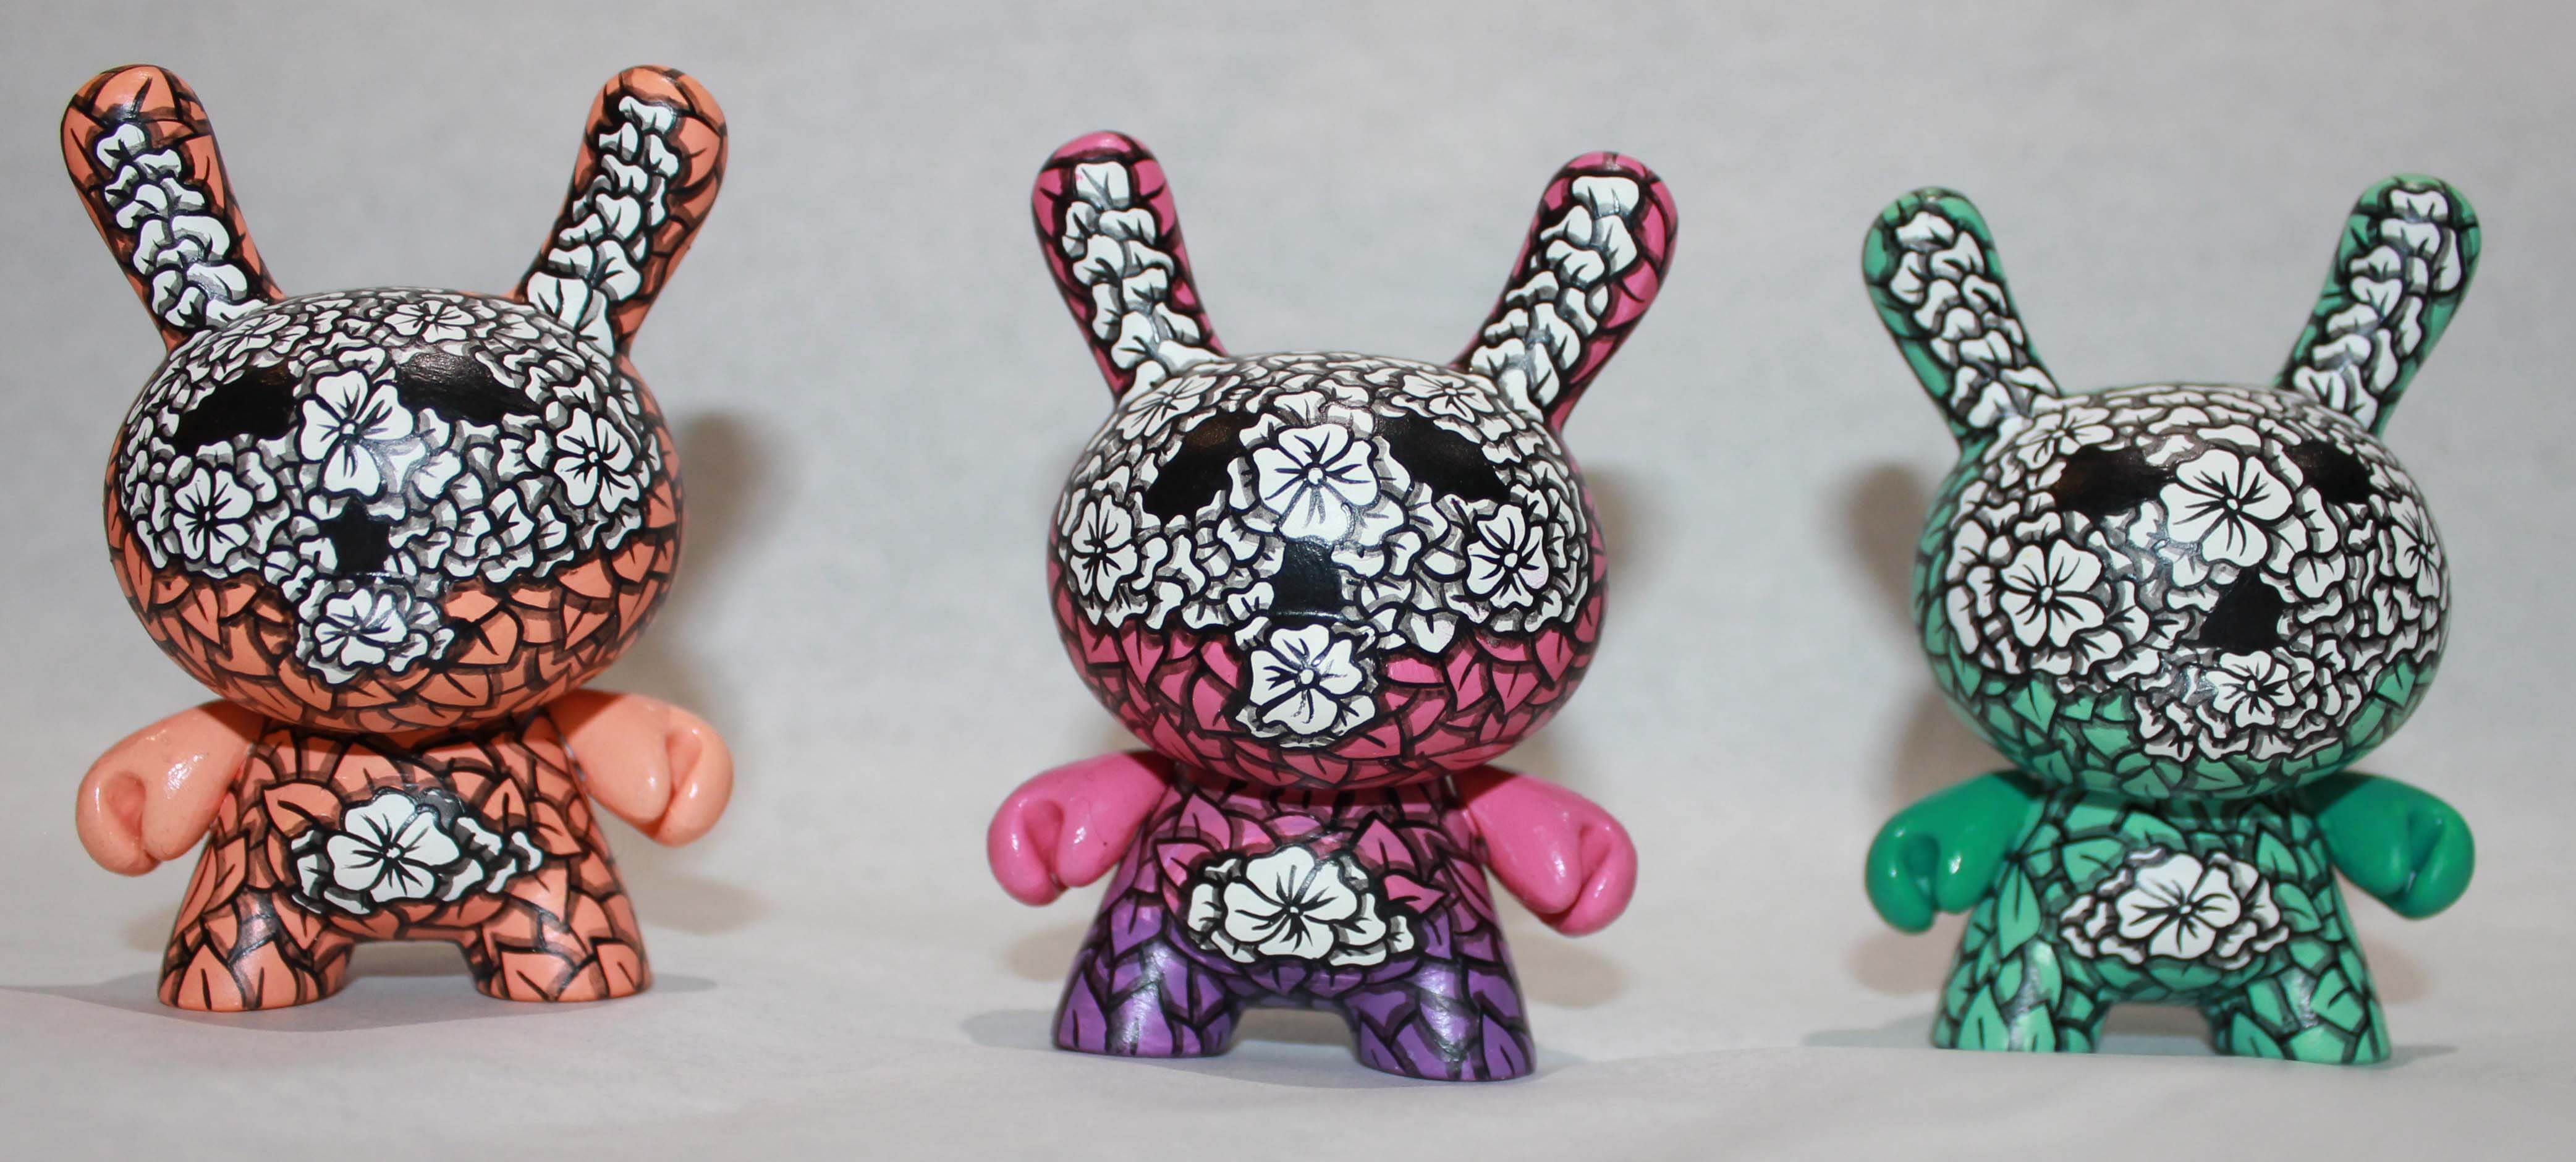 dunny1